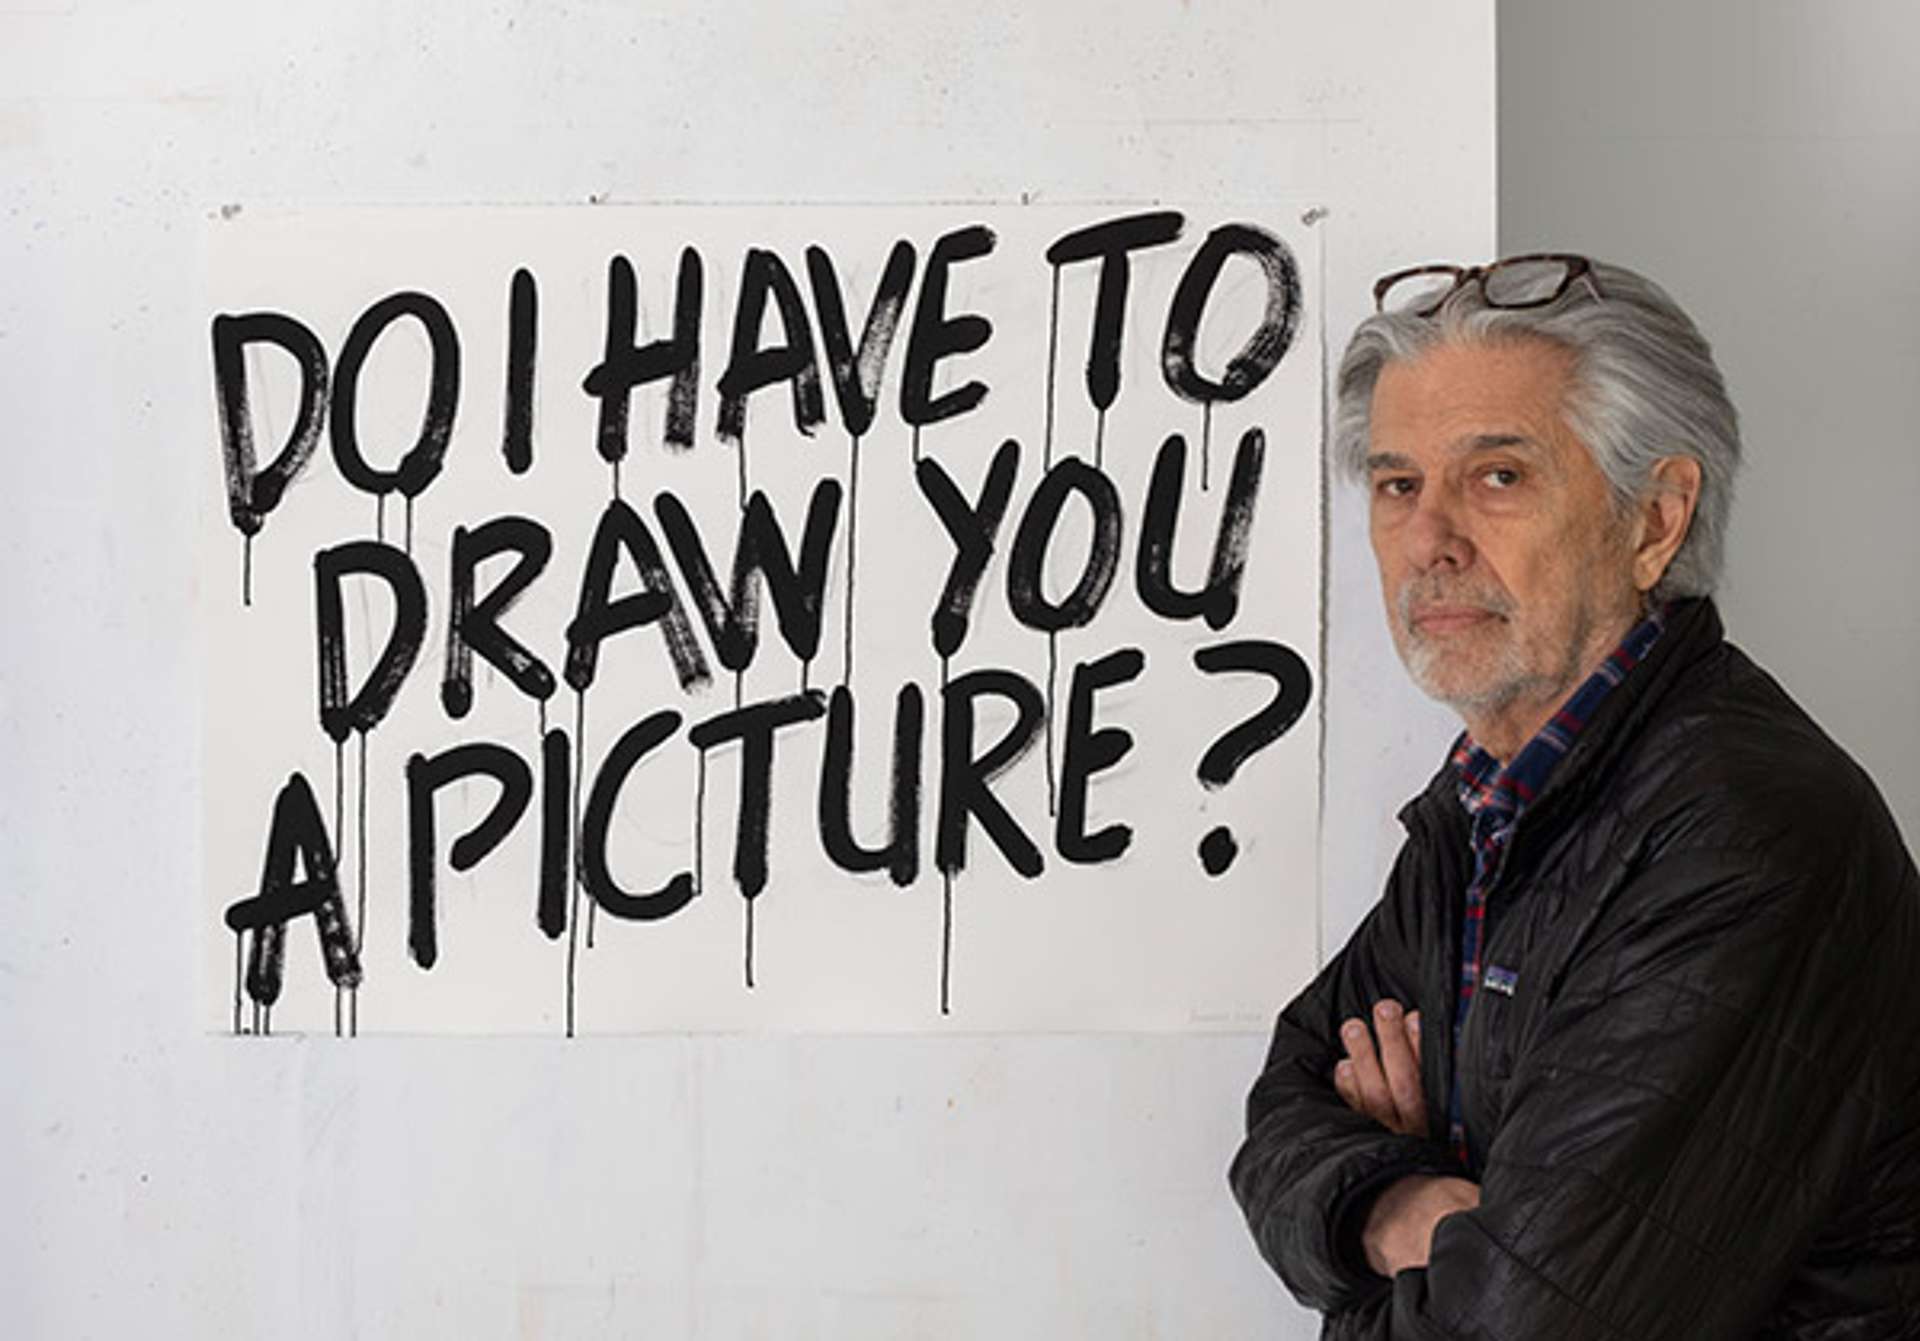 A photograph of Mel Bochner standing against a white wall, crossing his arms and turning his head towards the viewer. The wall is adorned with the spray-painted phrase "DO I HAVE TO DRAW YOU A PICTURE?" in bold black letters.